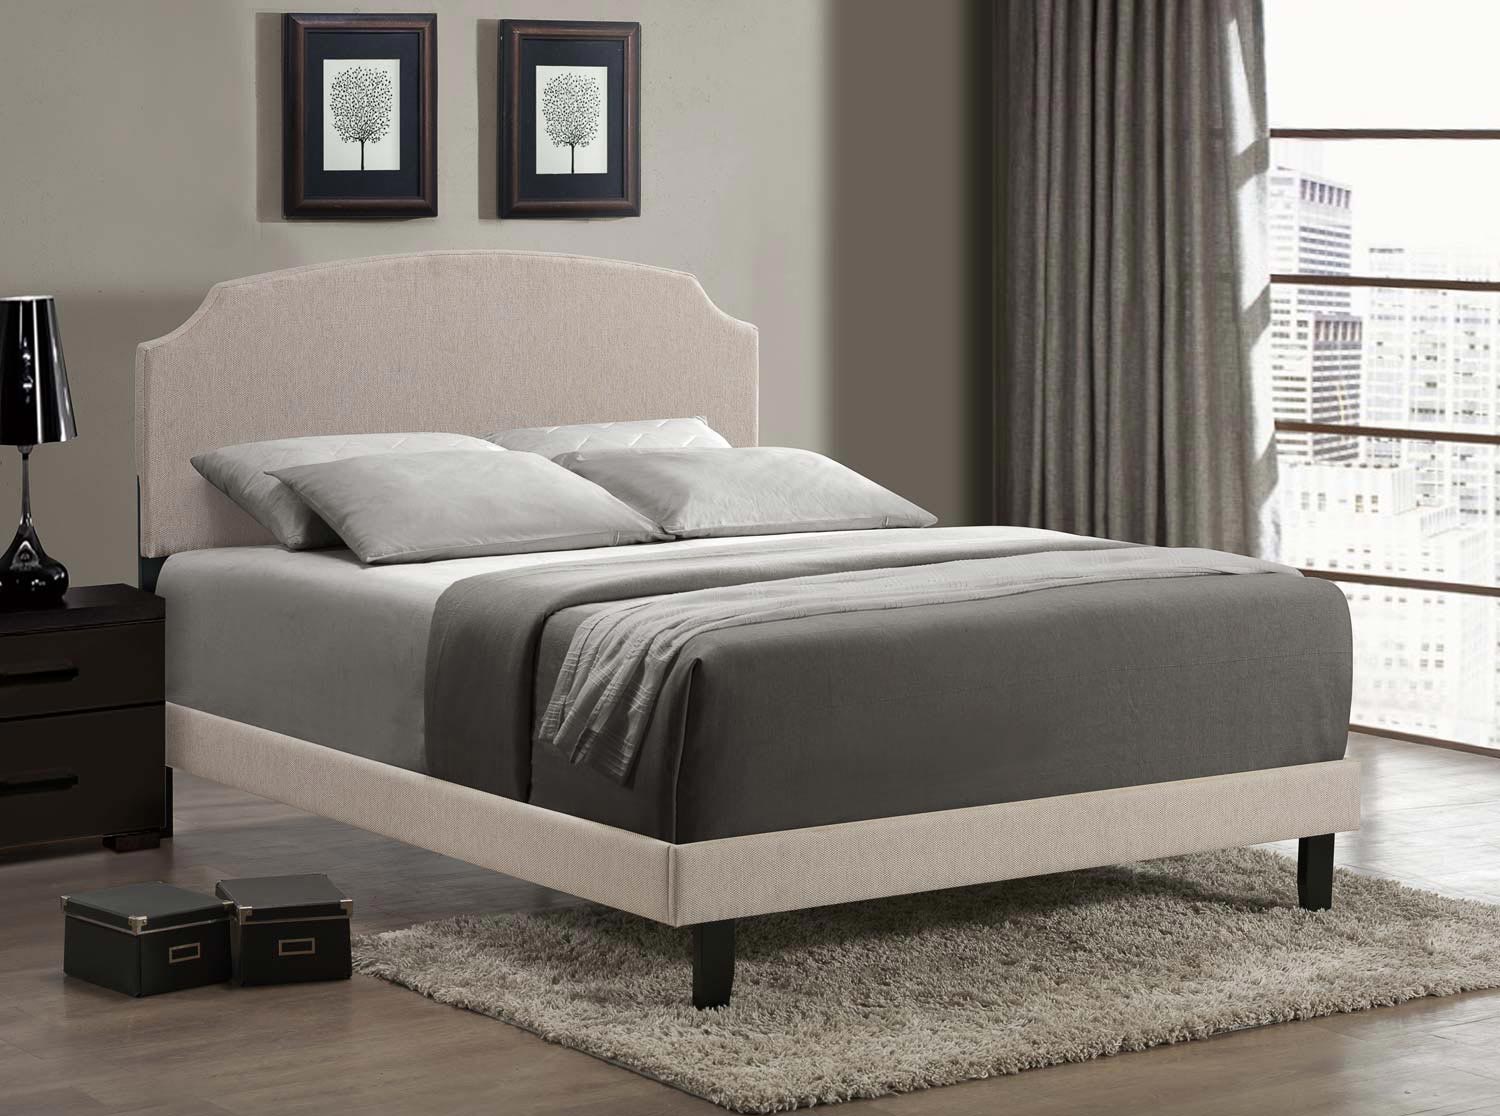 Hillsdale Lawler Bed